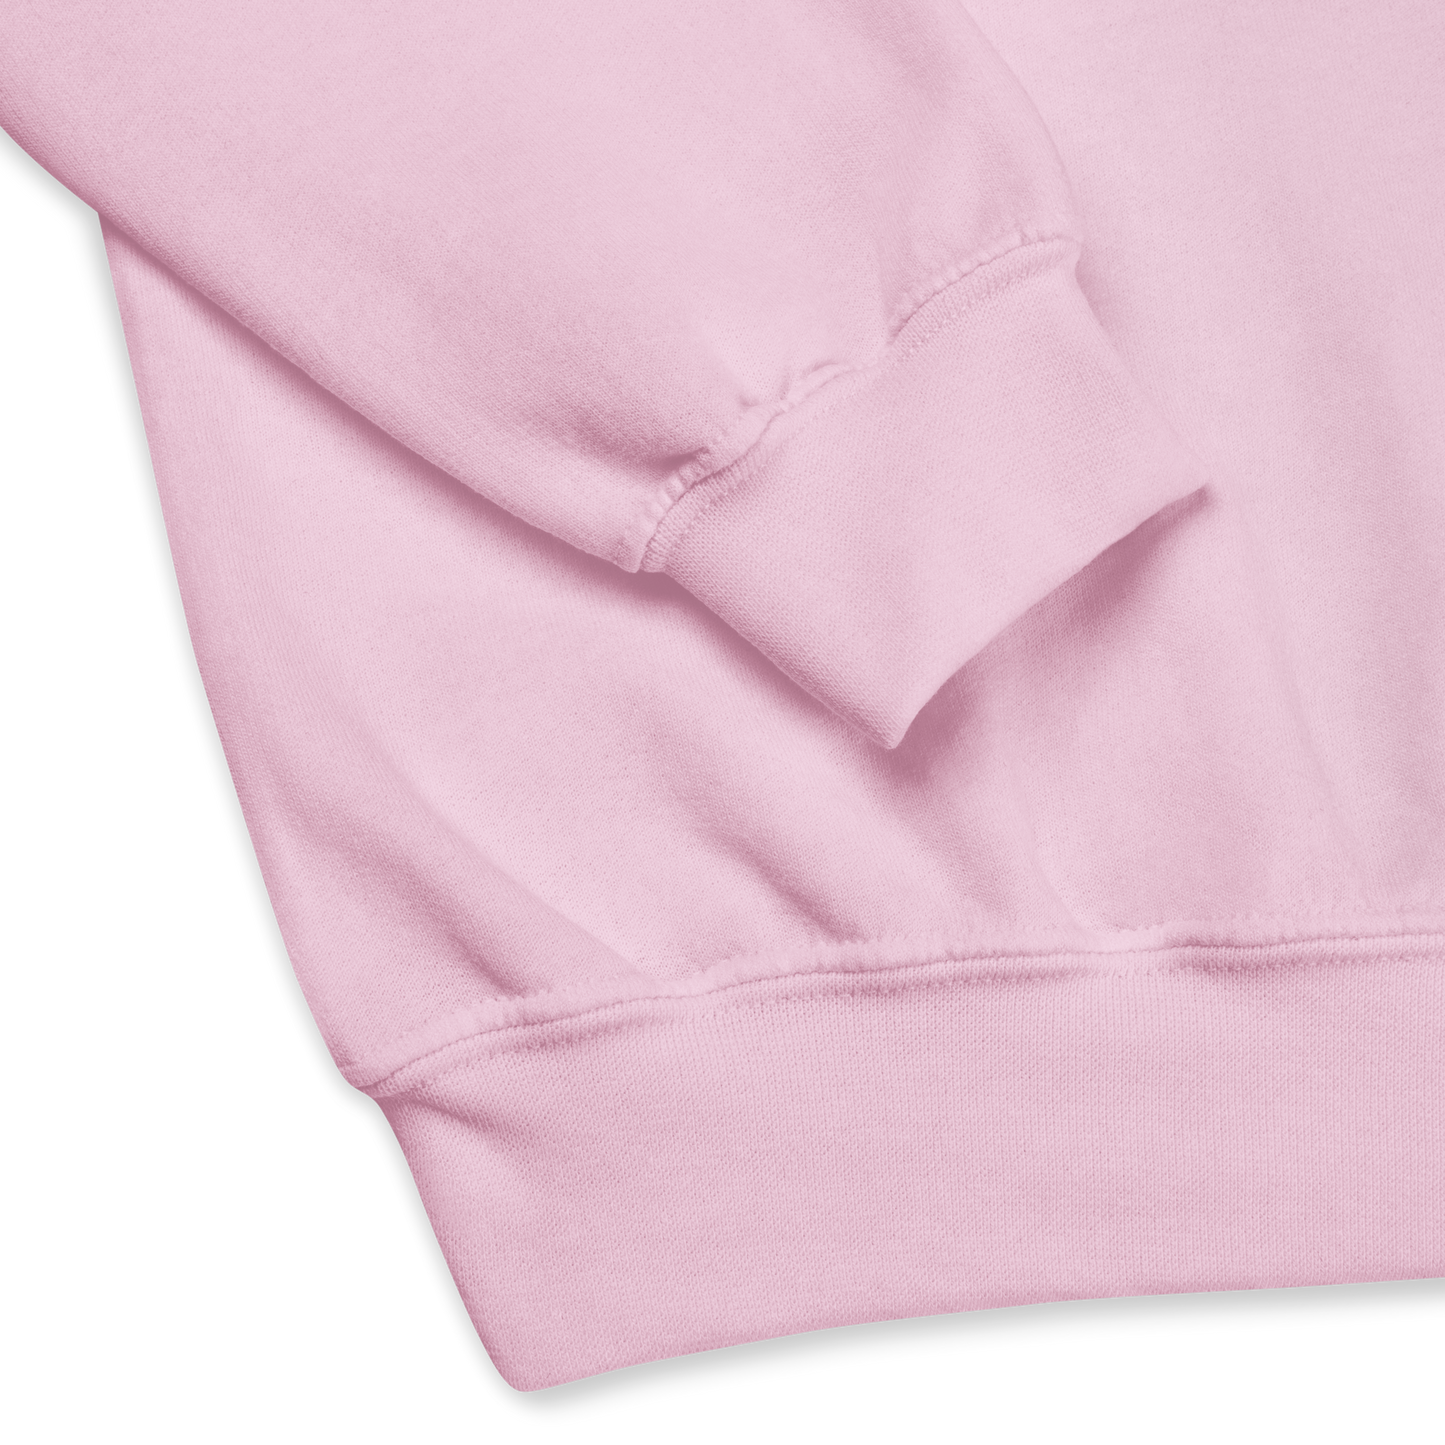 Close Details of a Light Pink Highland Cow Sweatshirt featuring an adorable Highland Girl graphic on the chest - Cute Graphic Highland Cow Sweatshirts - Boozy Fox